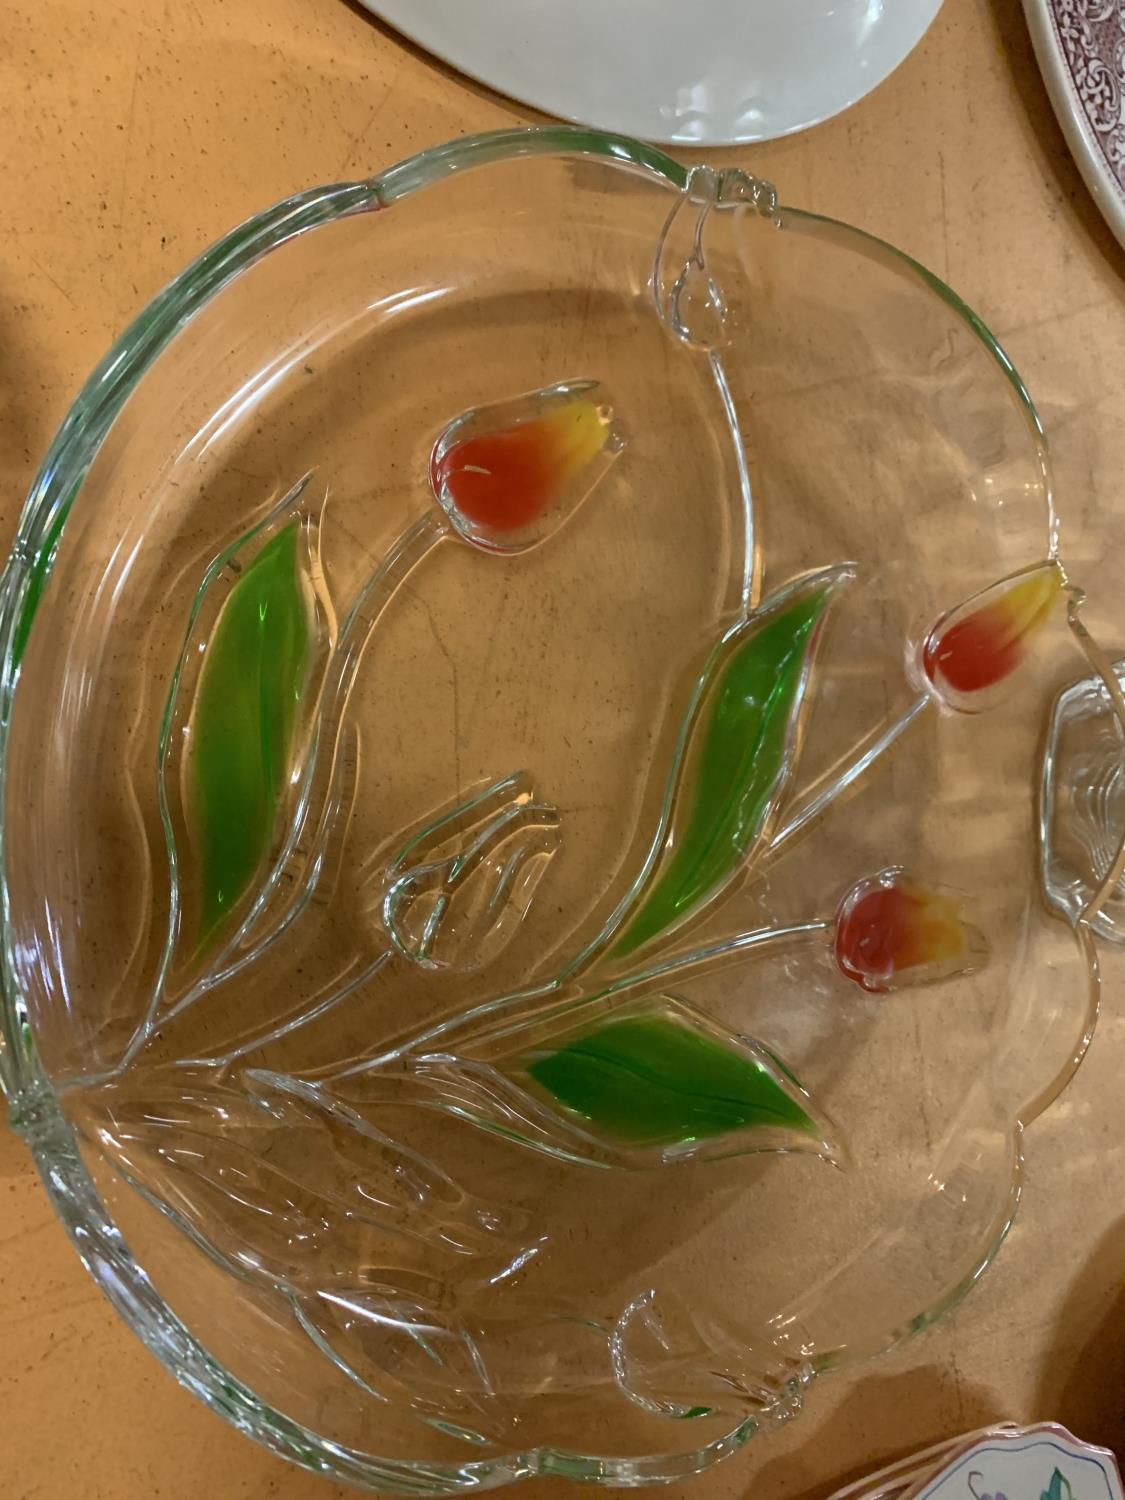 A GROUP OF GLASSWARE TO INCLUDE MURANO GLASS SWEETS IN THEIR GLASS WRAPPERS - Image 3 of 3